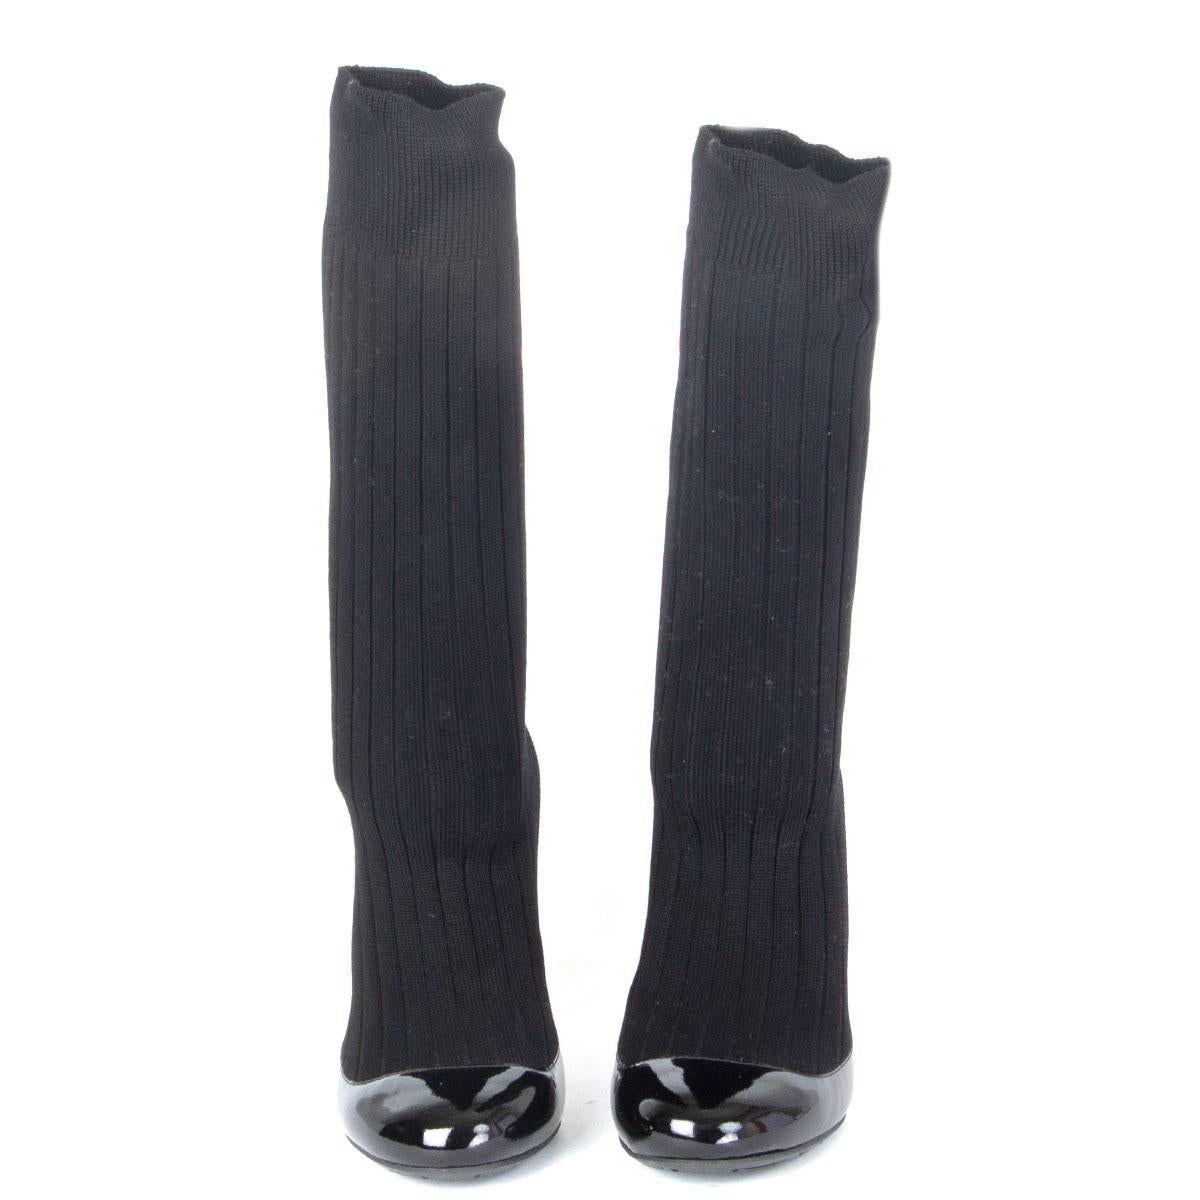 authentic Chanel round-toe ribbed sock pumps in black patent leather. Spring/Summer 2014 runway. Have been worn and are in excellent condition. 

Imprinted Size 38
Shoe Size 38
Inside Sole 25cm (9.8in)
Width  7cm (2.7in)
Heel10cm (3.9in)
Shaft 25cm